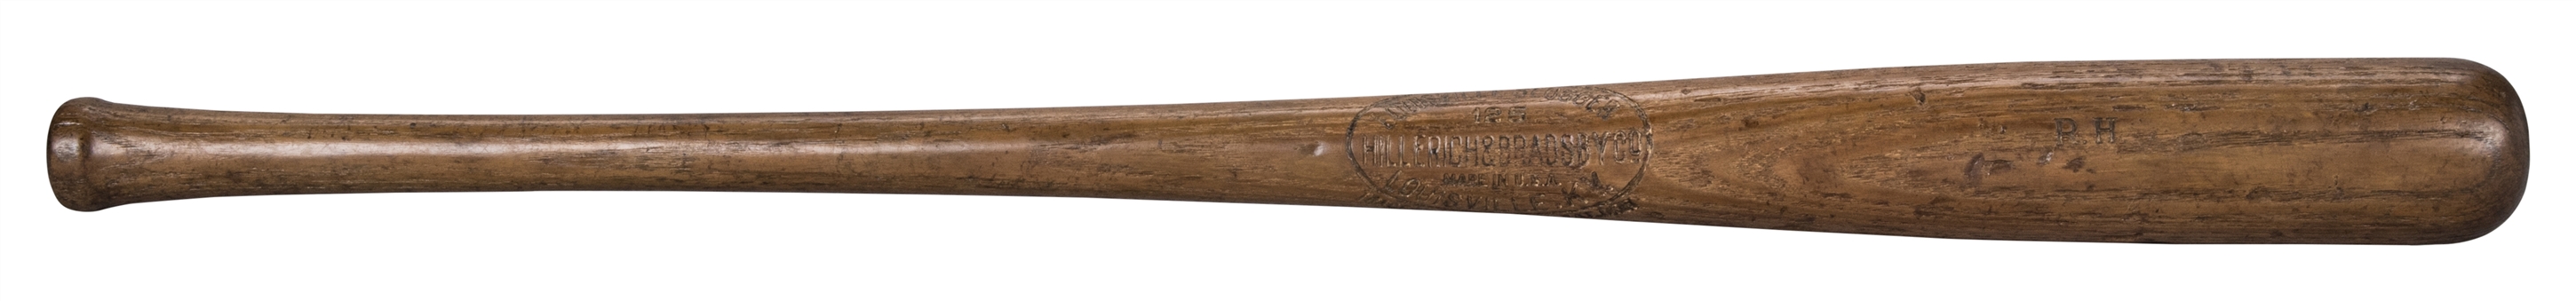 1923-25 Rogers Hornsby Game Used Hillerich & Bradsby "His Hornsby" Model Bat (PSA/DNA)